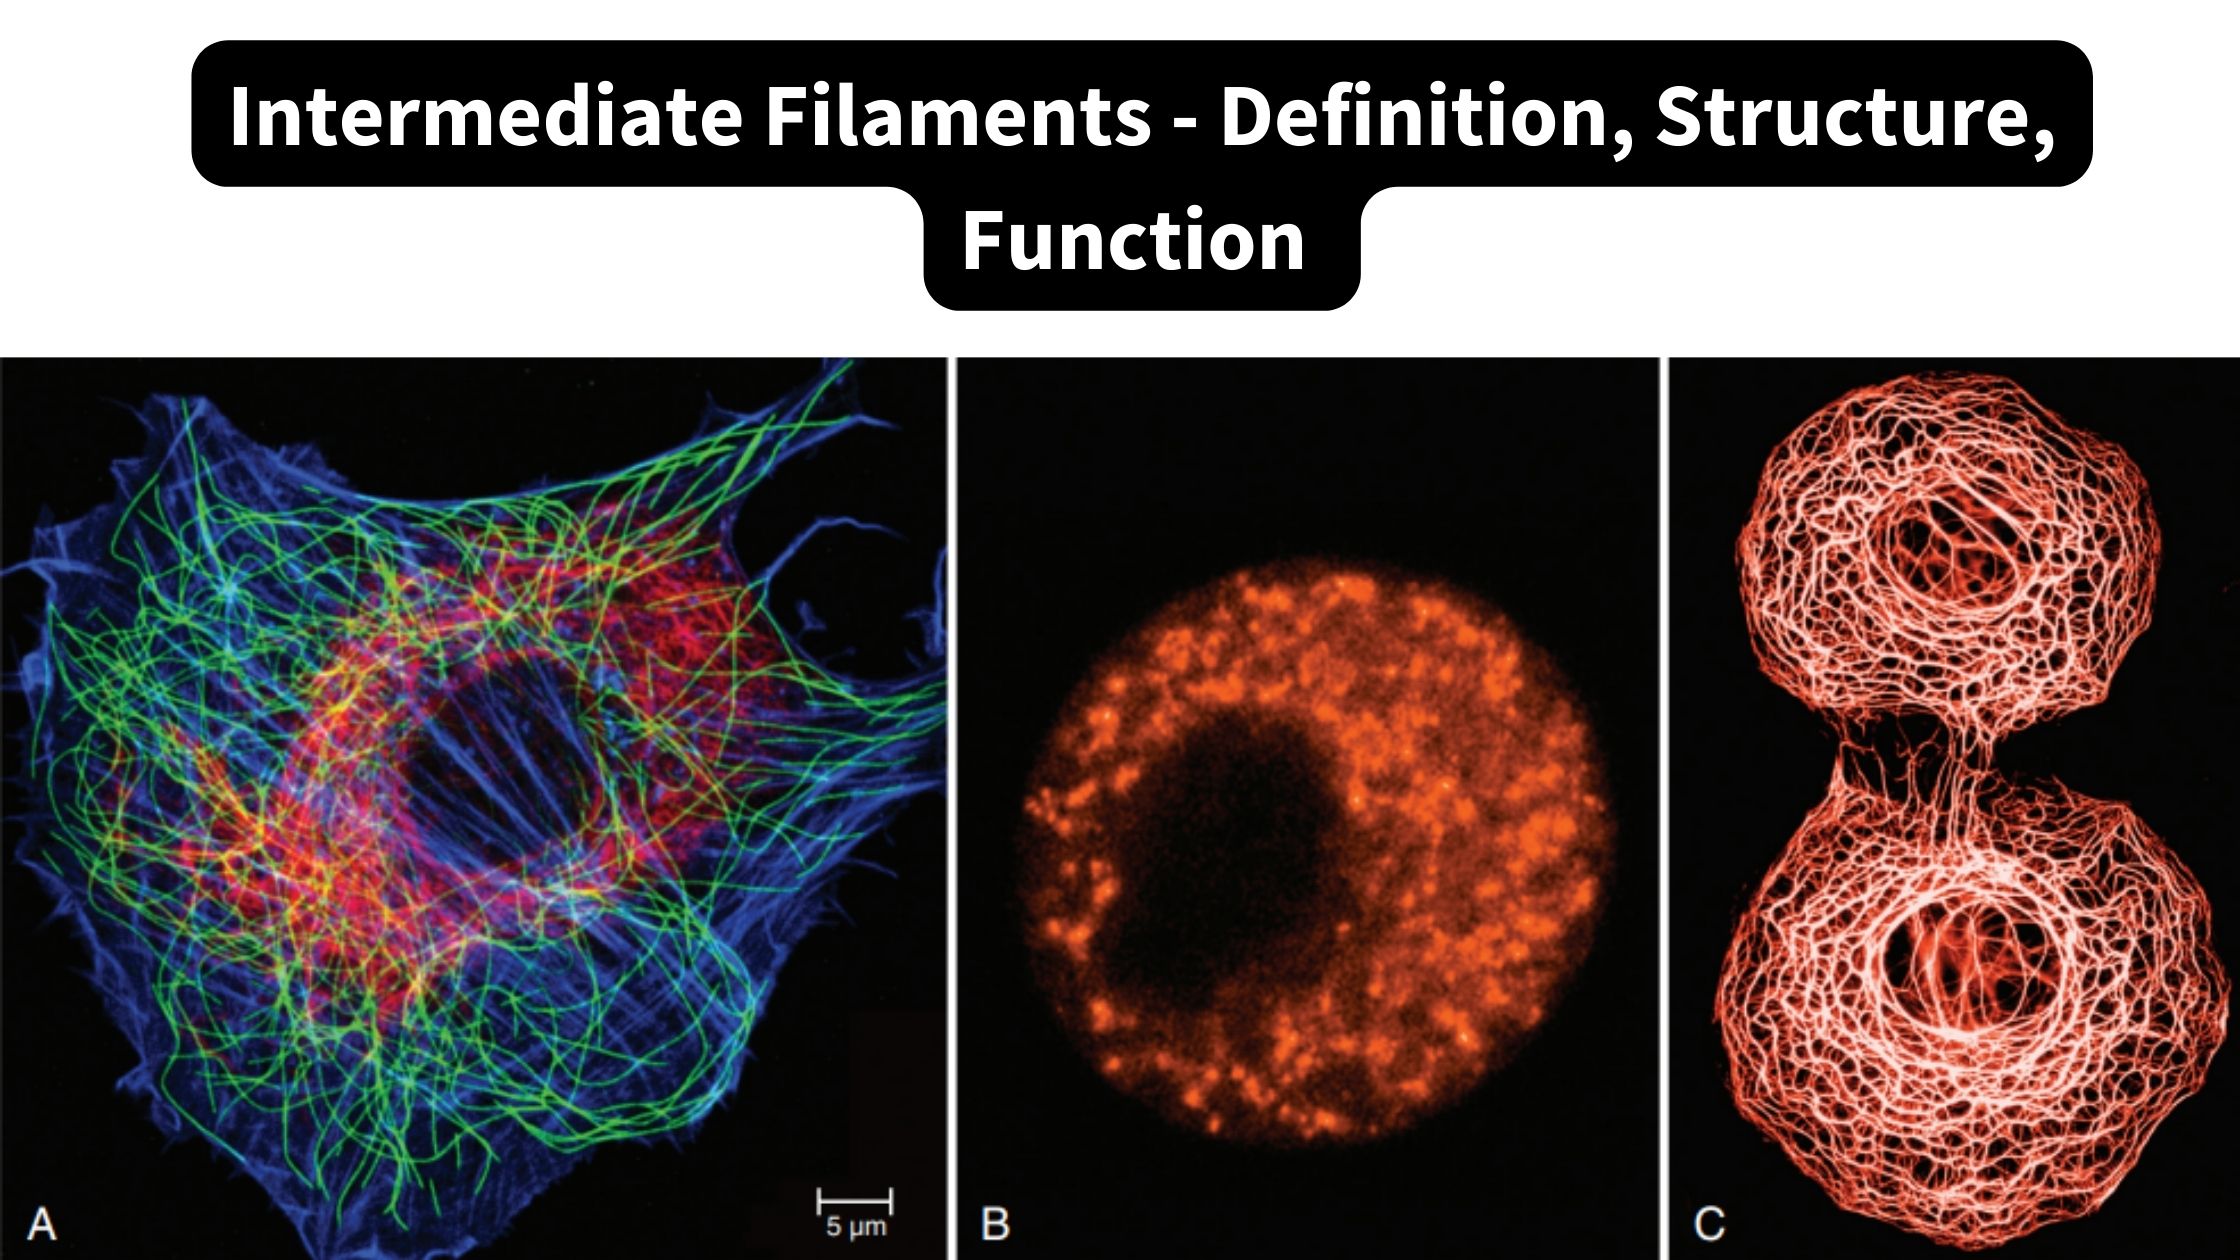 Intermediate Filaments - Definition, Structure, Function 